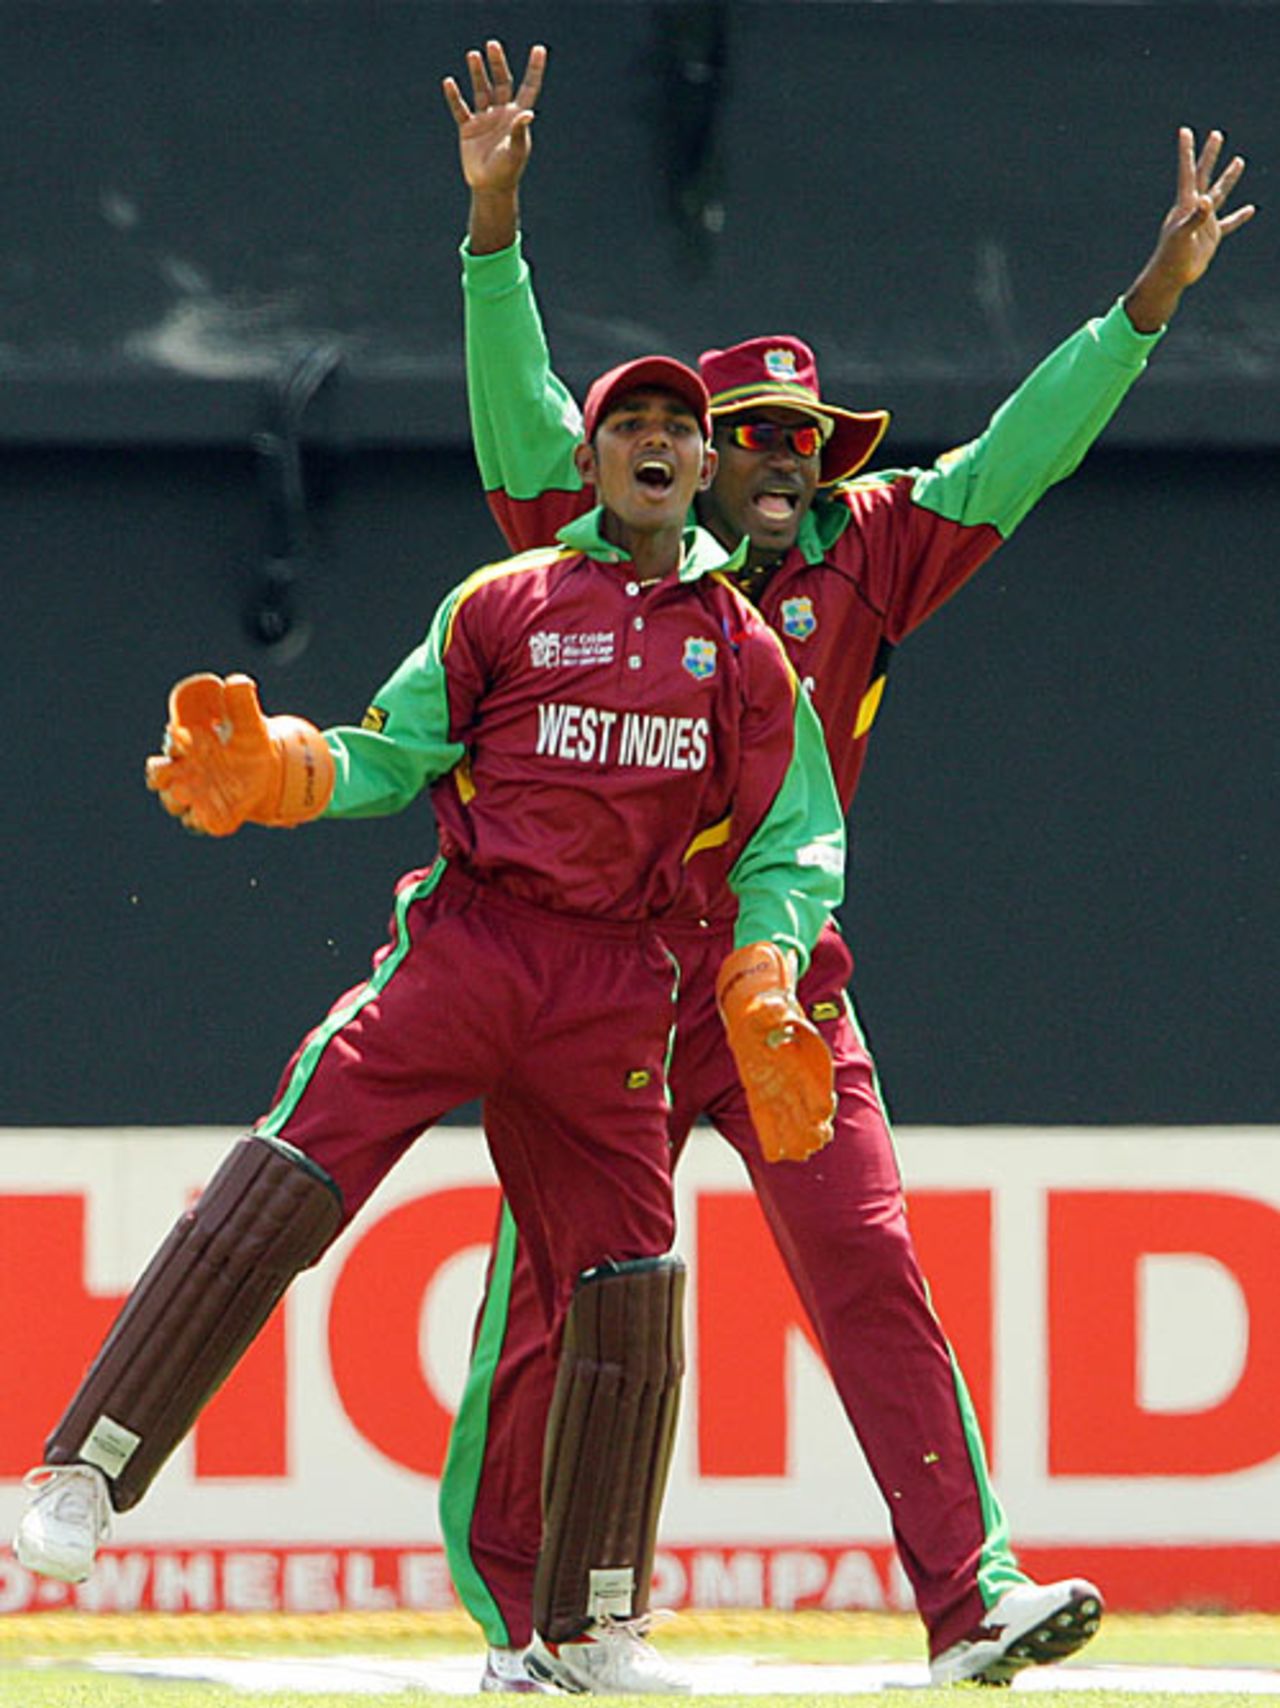 Denesh Ramdin celebrates the wicket of Imran Nazir, West Indies v Pakistan, Group D, Kingston, 2007 World Cup, March 13, 2007